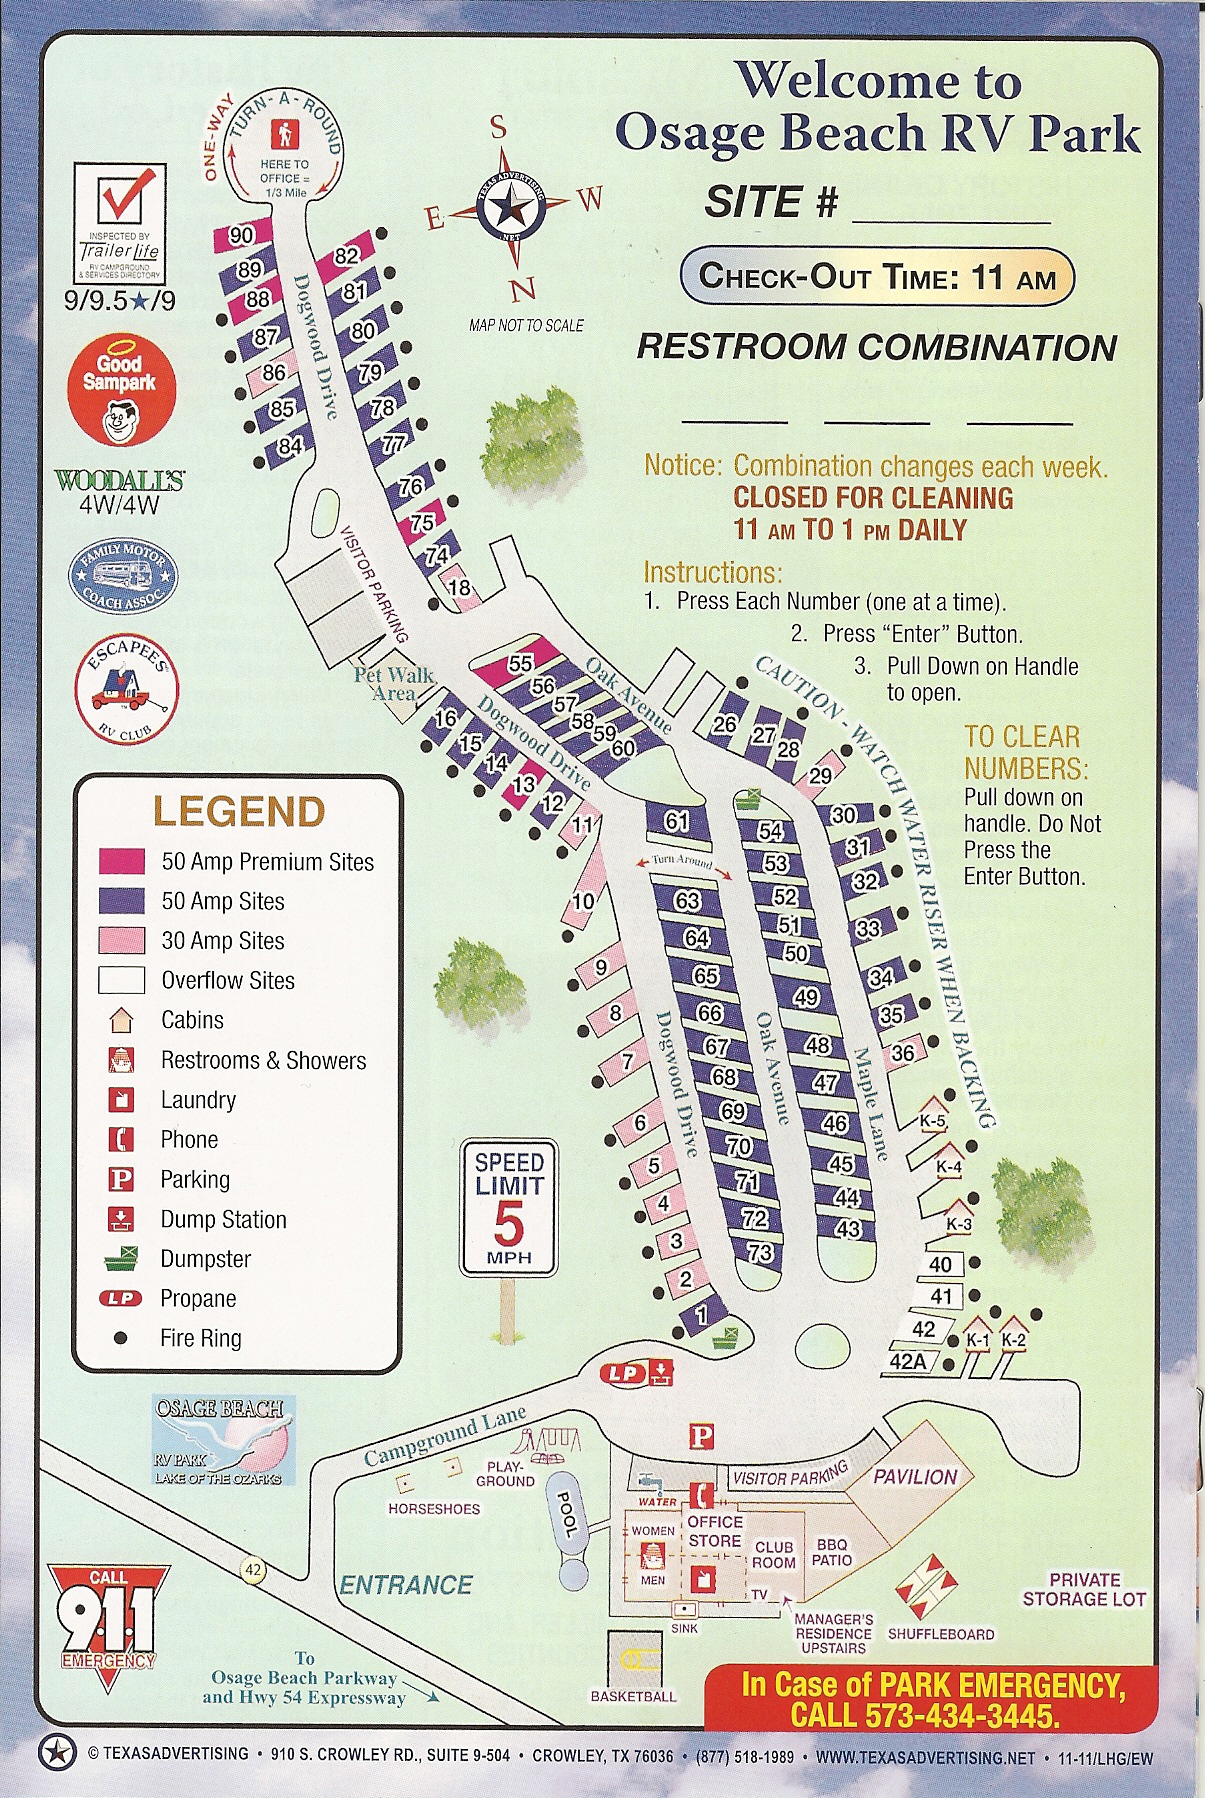 Osage Beach RV Park Camping Site Map 2012